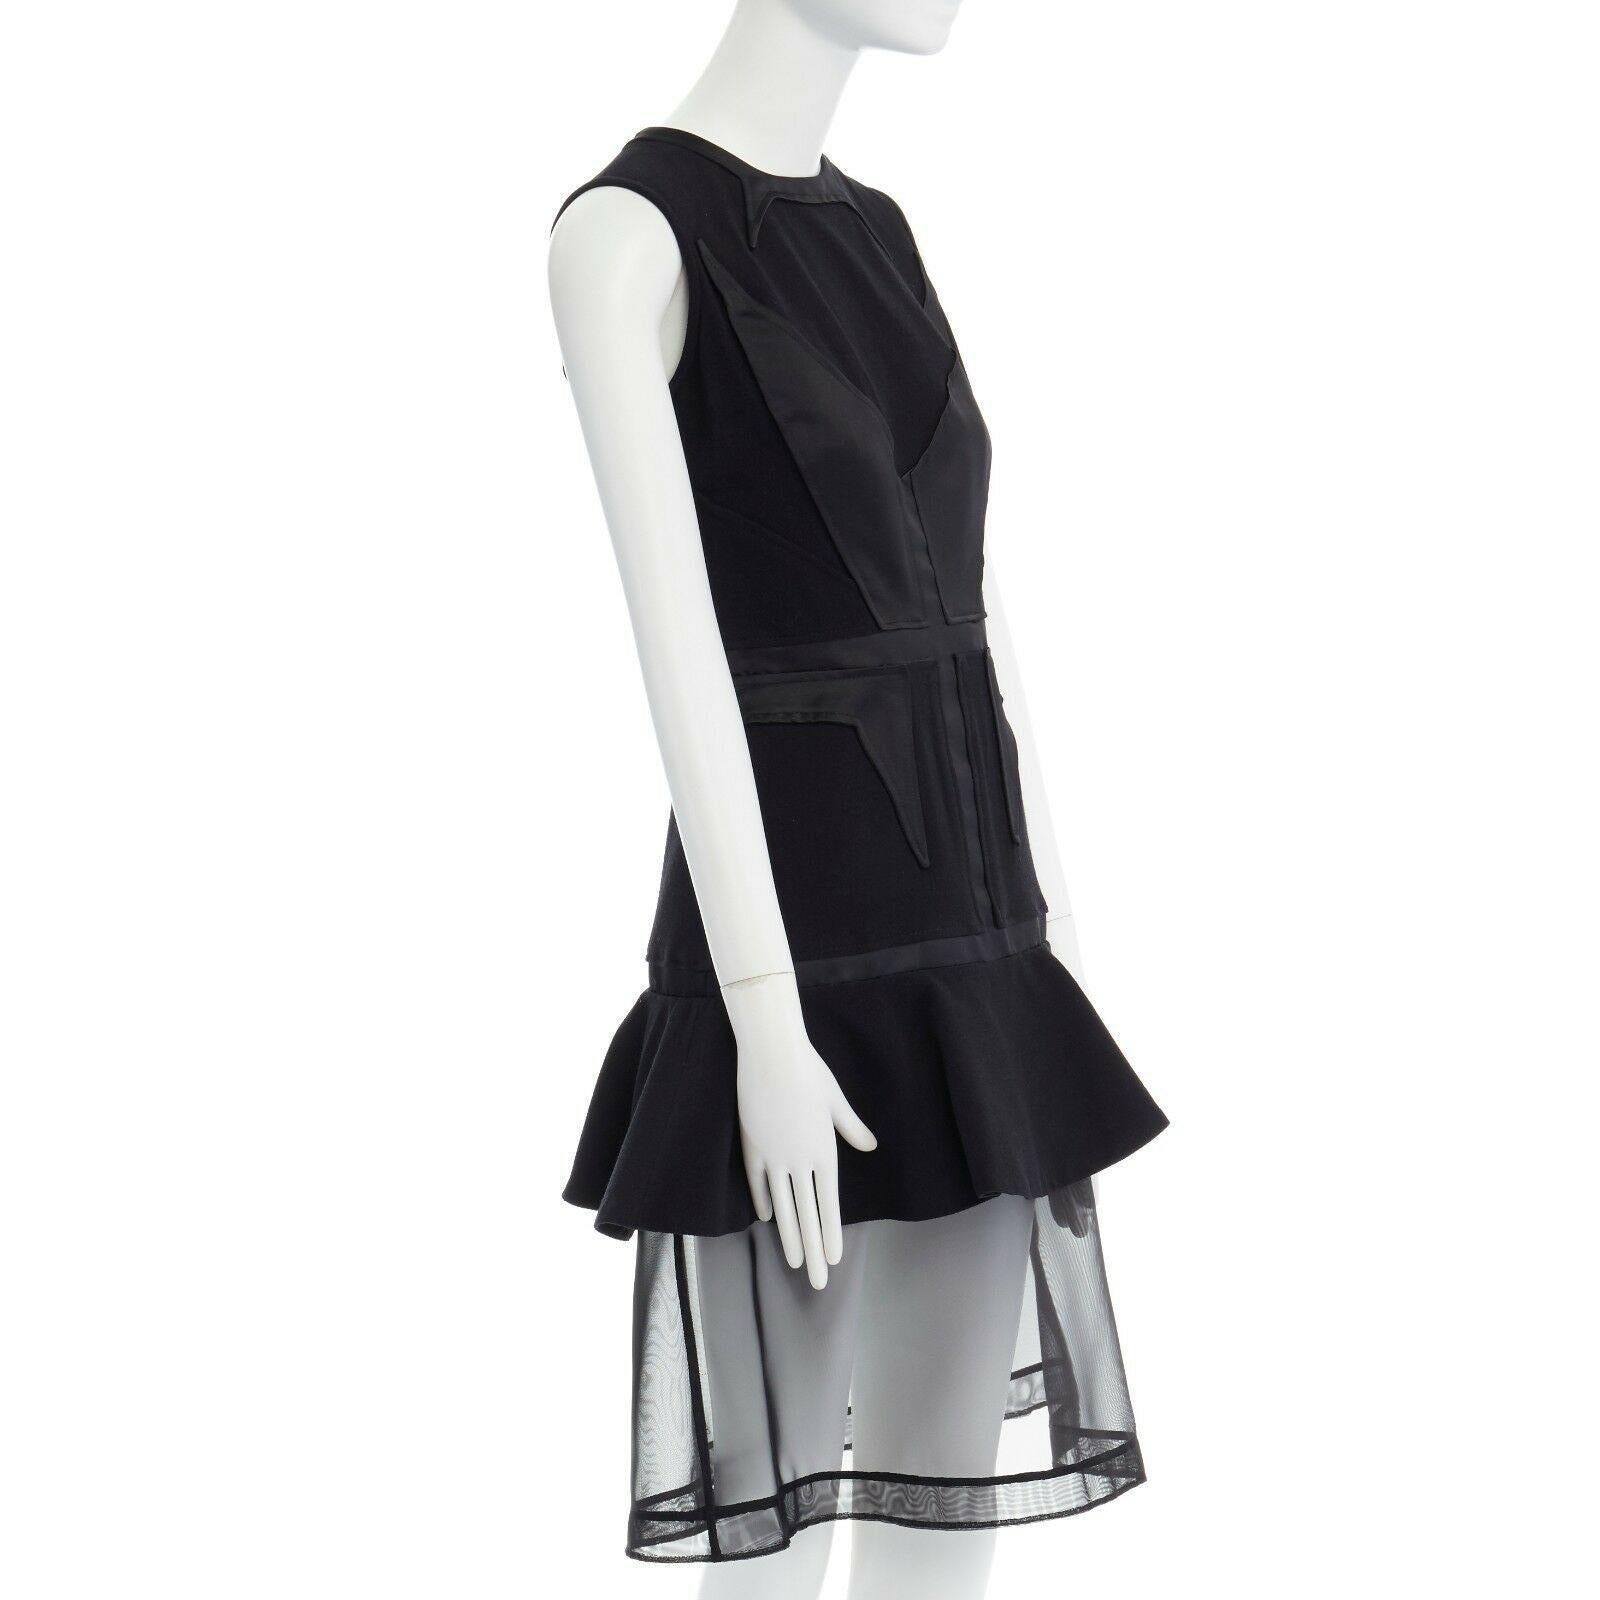 Women's GIVENCHY TISCI 2011 black angular patched sheer skirt layer dress FR38 M